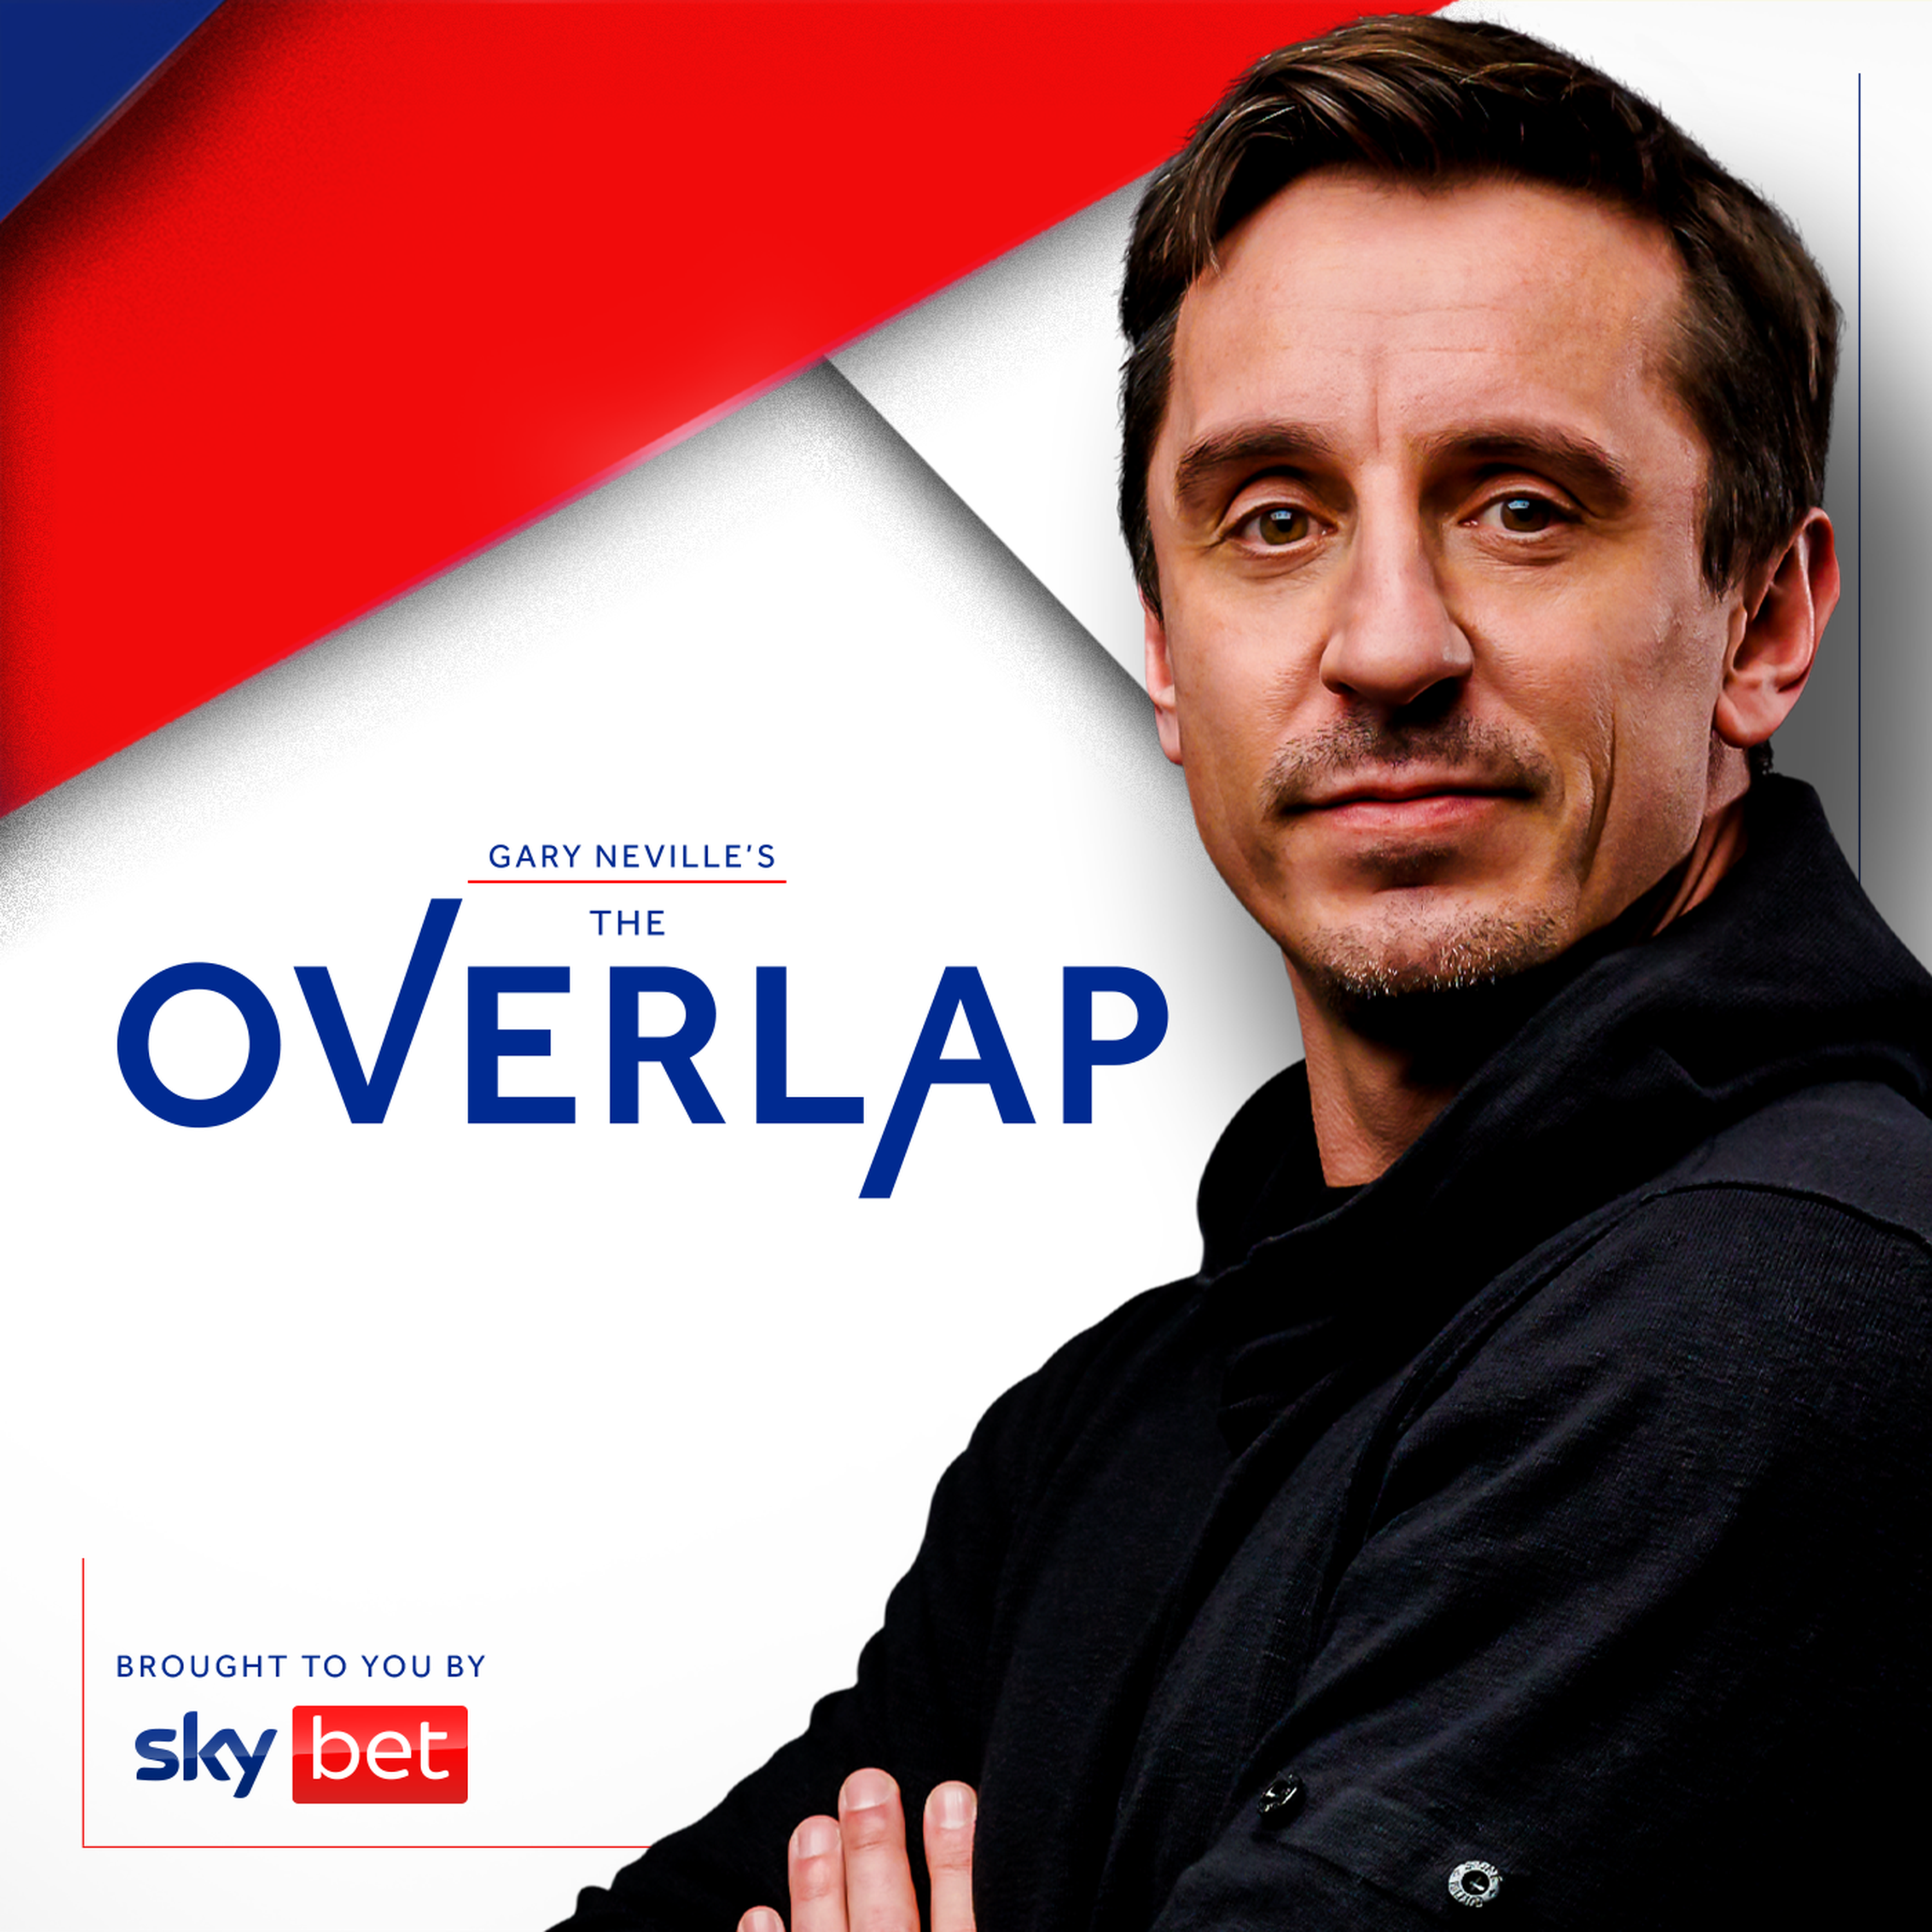 Introducing The Overlap with Gary Neville. Have a listen, if you like!